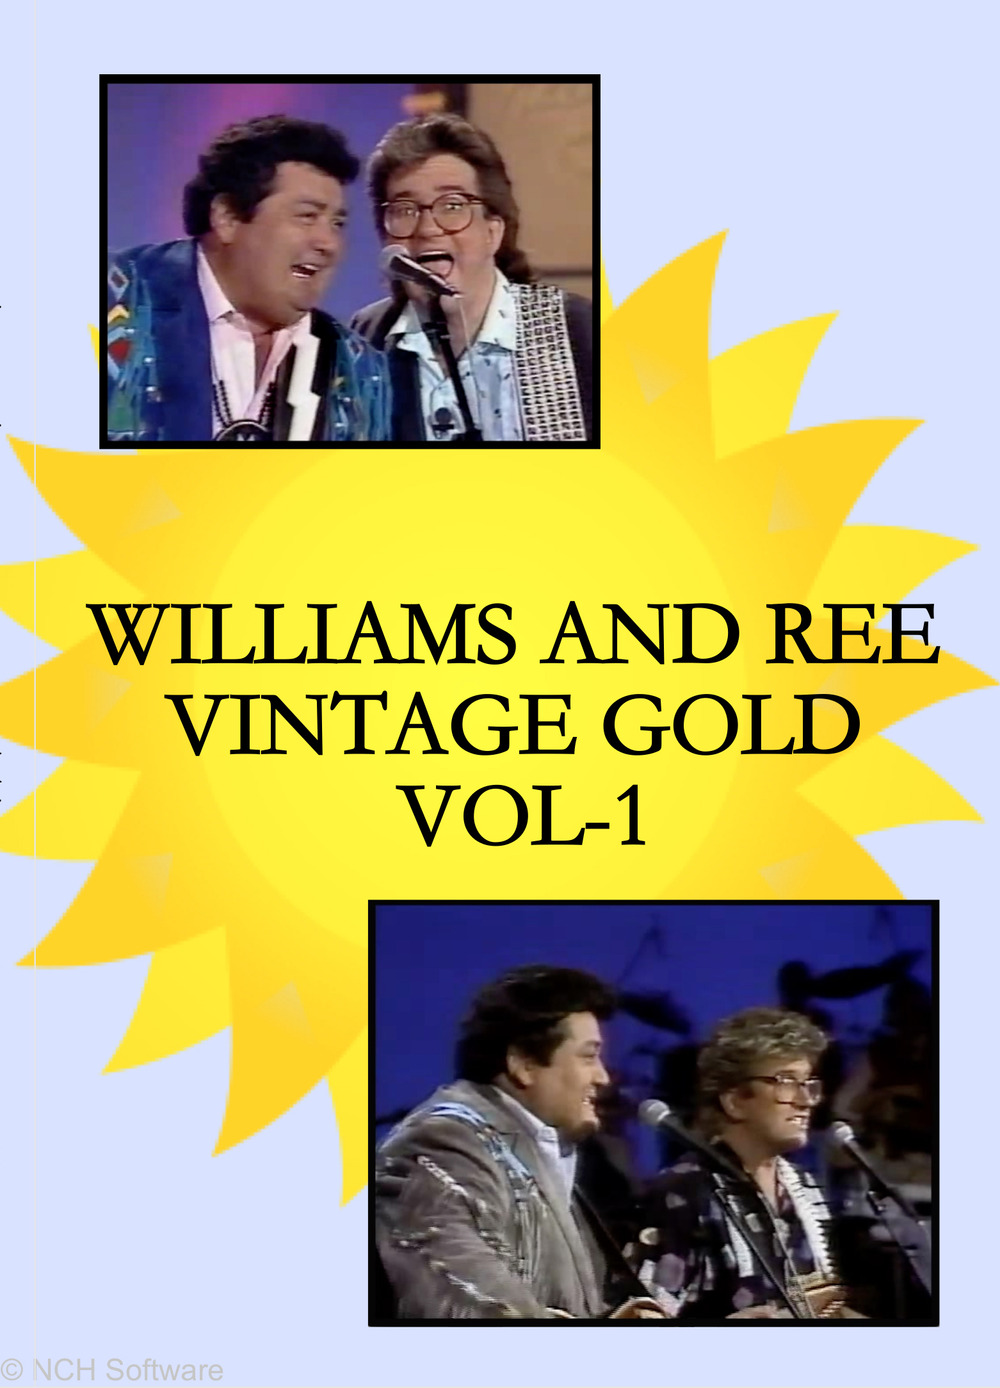 WILLIAMS AND REE VINTAGE GOLD VOL. 1 DVD